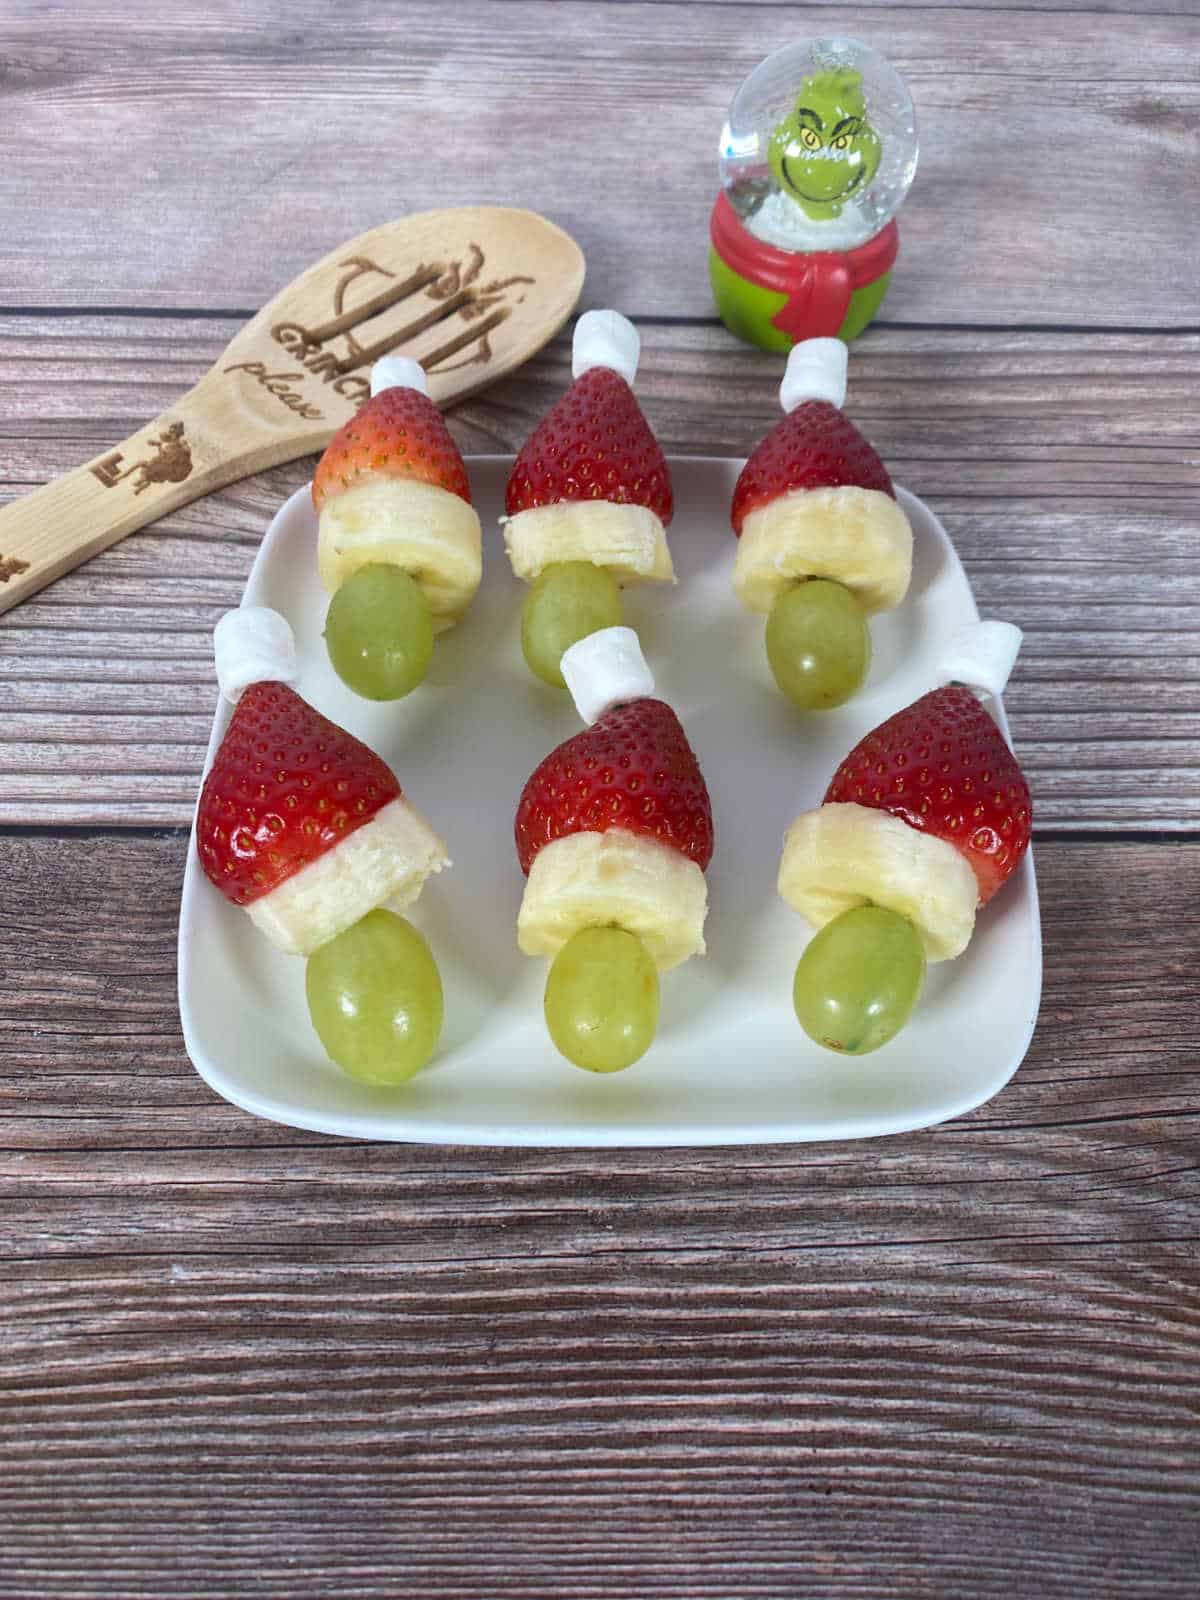 Skewers sit on a plate with a Grinch spoon and mini Grinch snow globe.